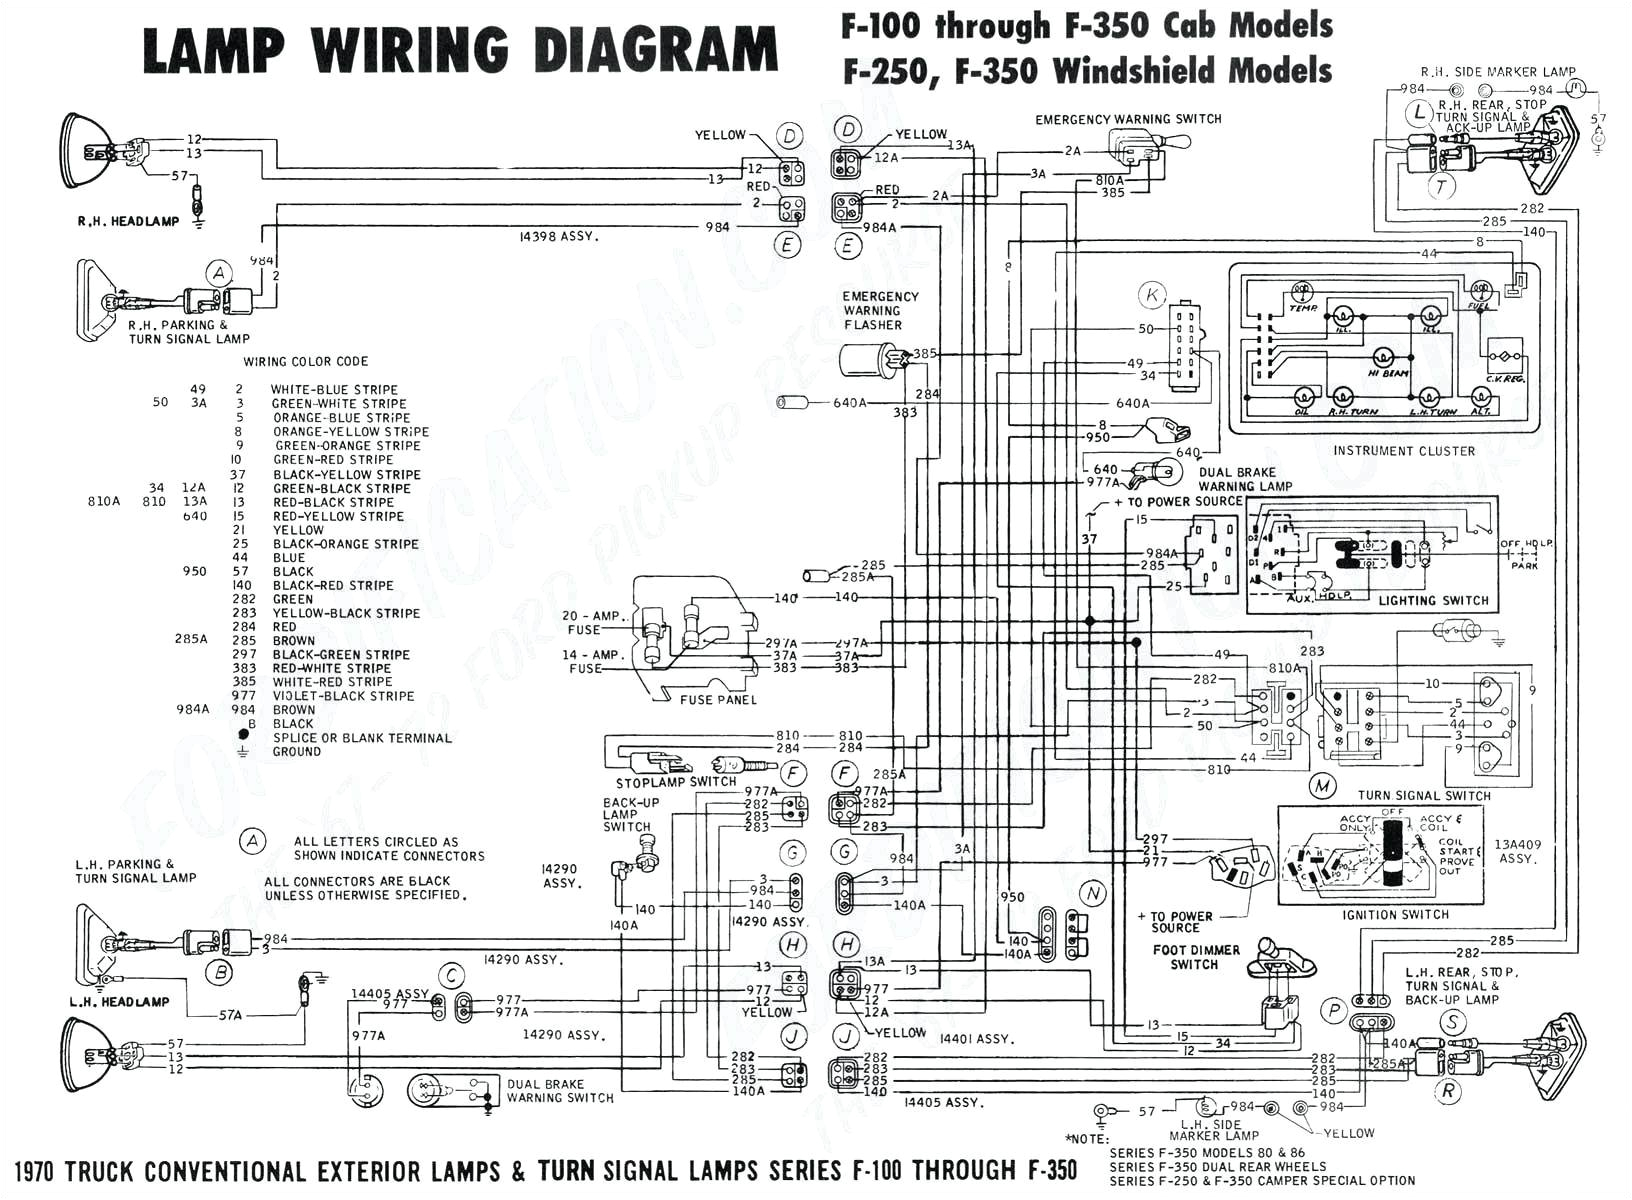 1989 chevy truck tail light wiring wiring diagrams global wiring diagram 89 chevy truck wiring diagram